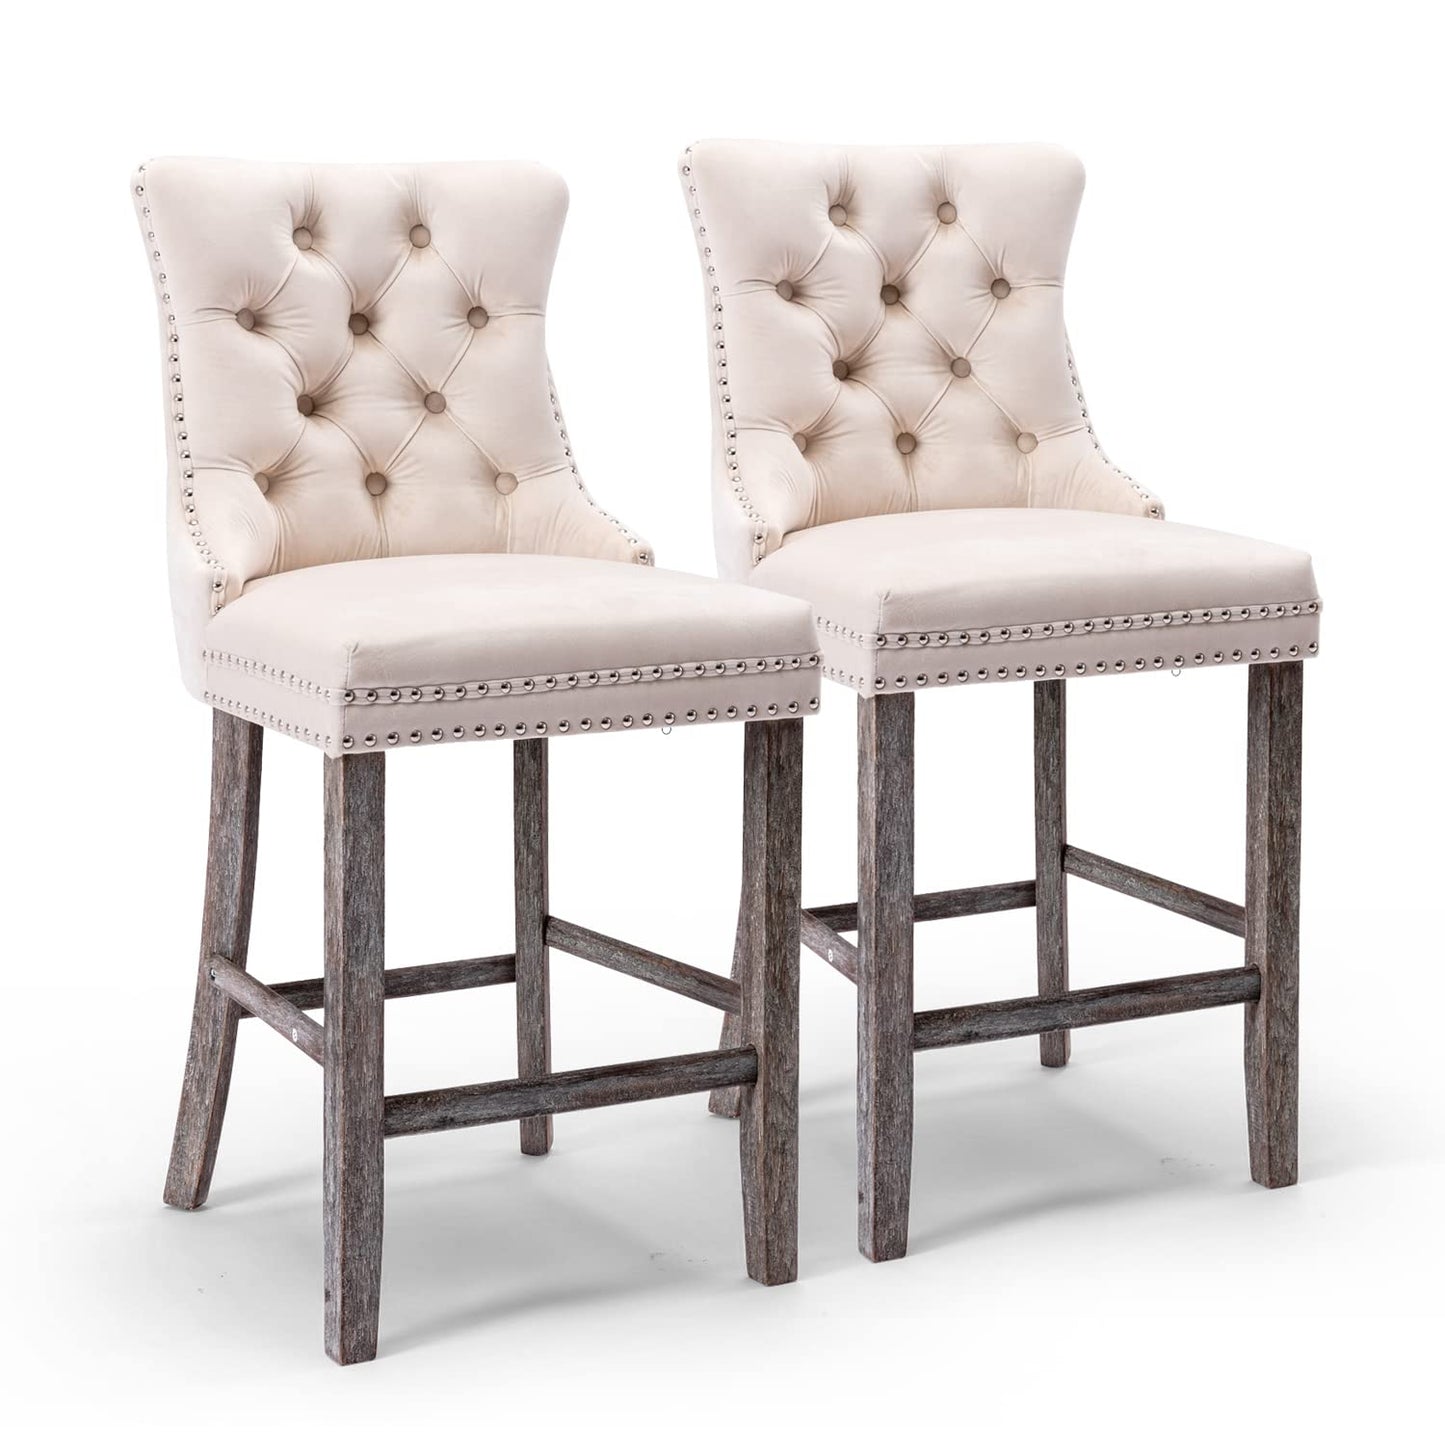 2X Velvet Bar Stools with Studs Trim Wooden Legs Tufted Dining Chairs Kitchen - image11